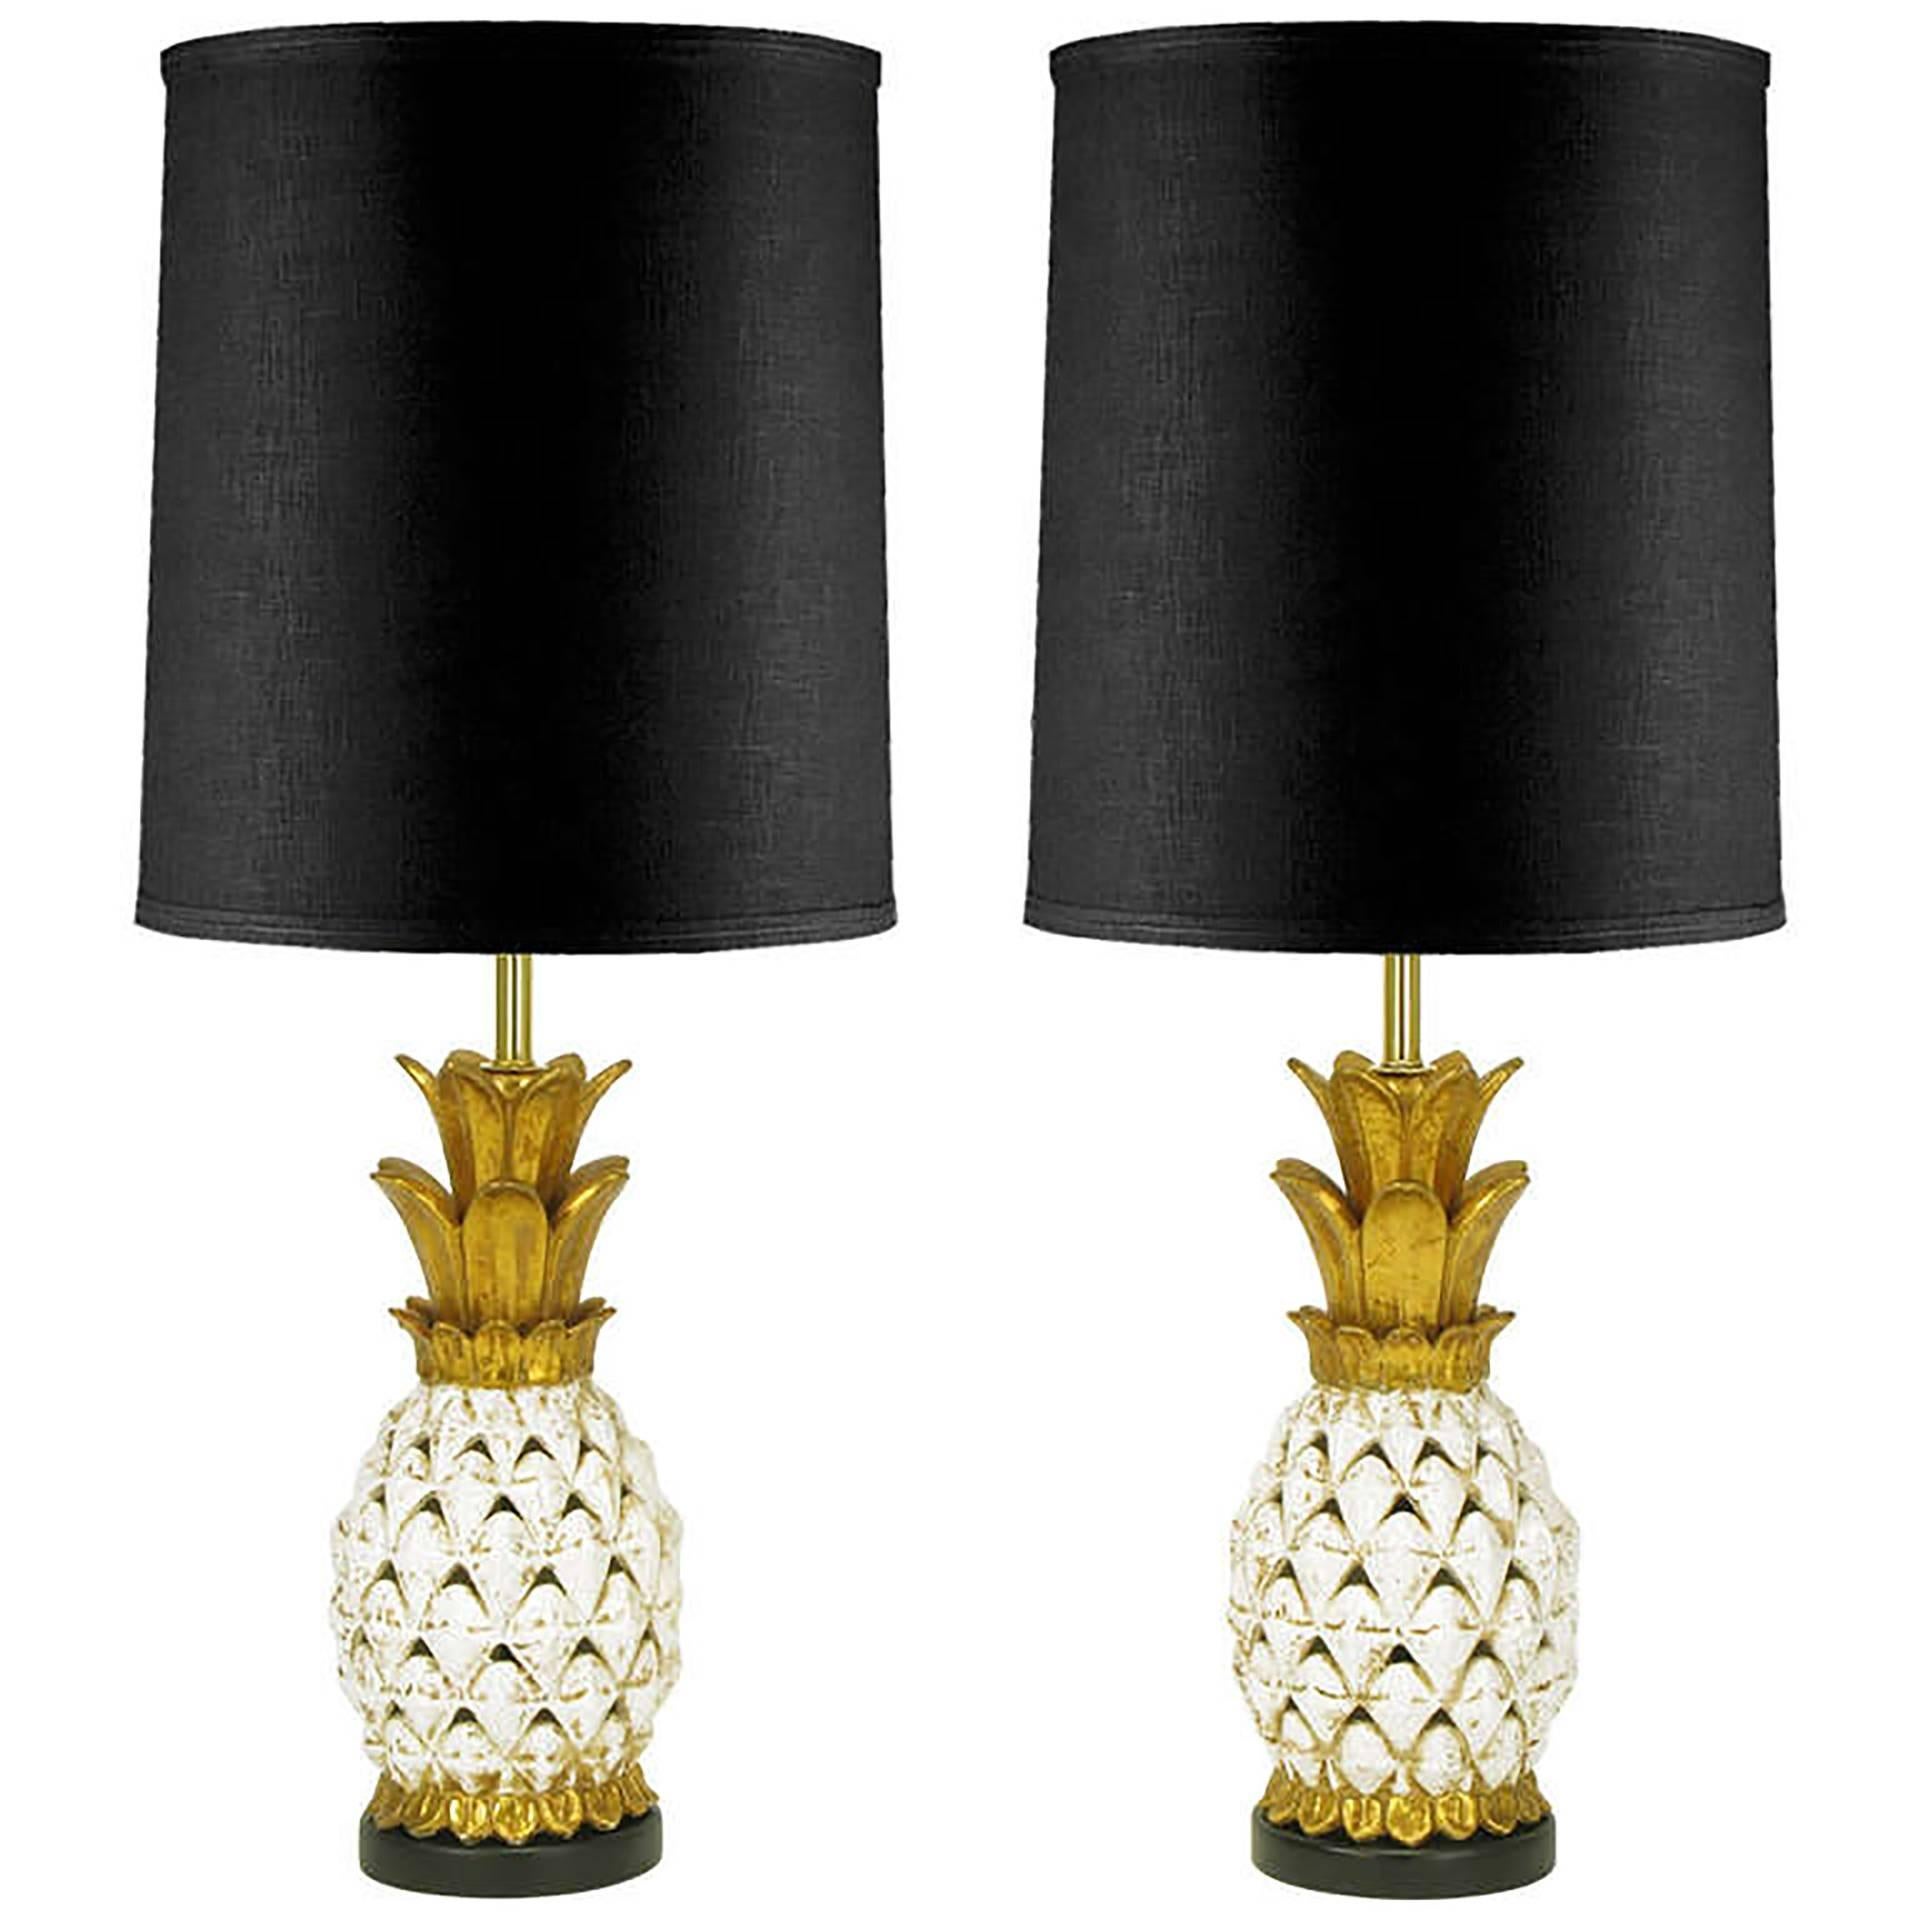 Pair of Reticulated Craquelure Glazed Pottery Pineapple-Form Table Lamps